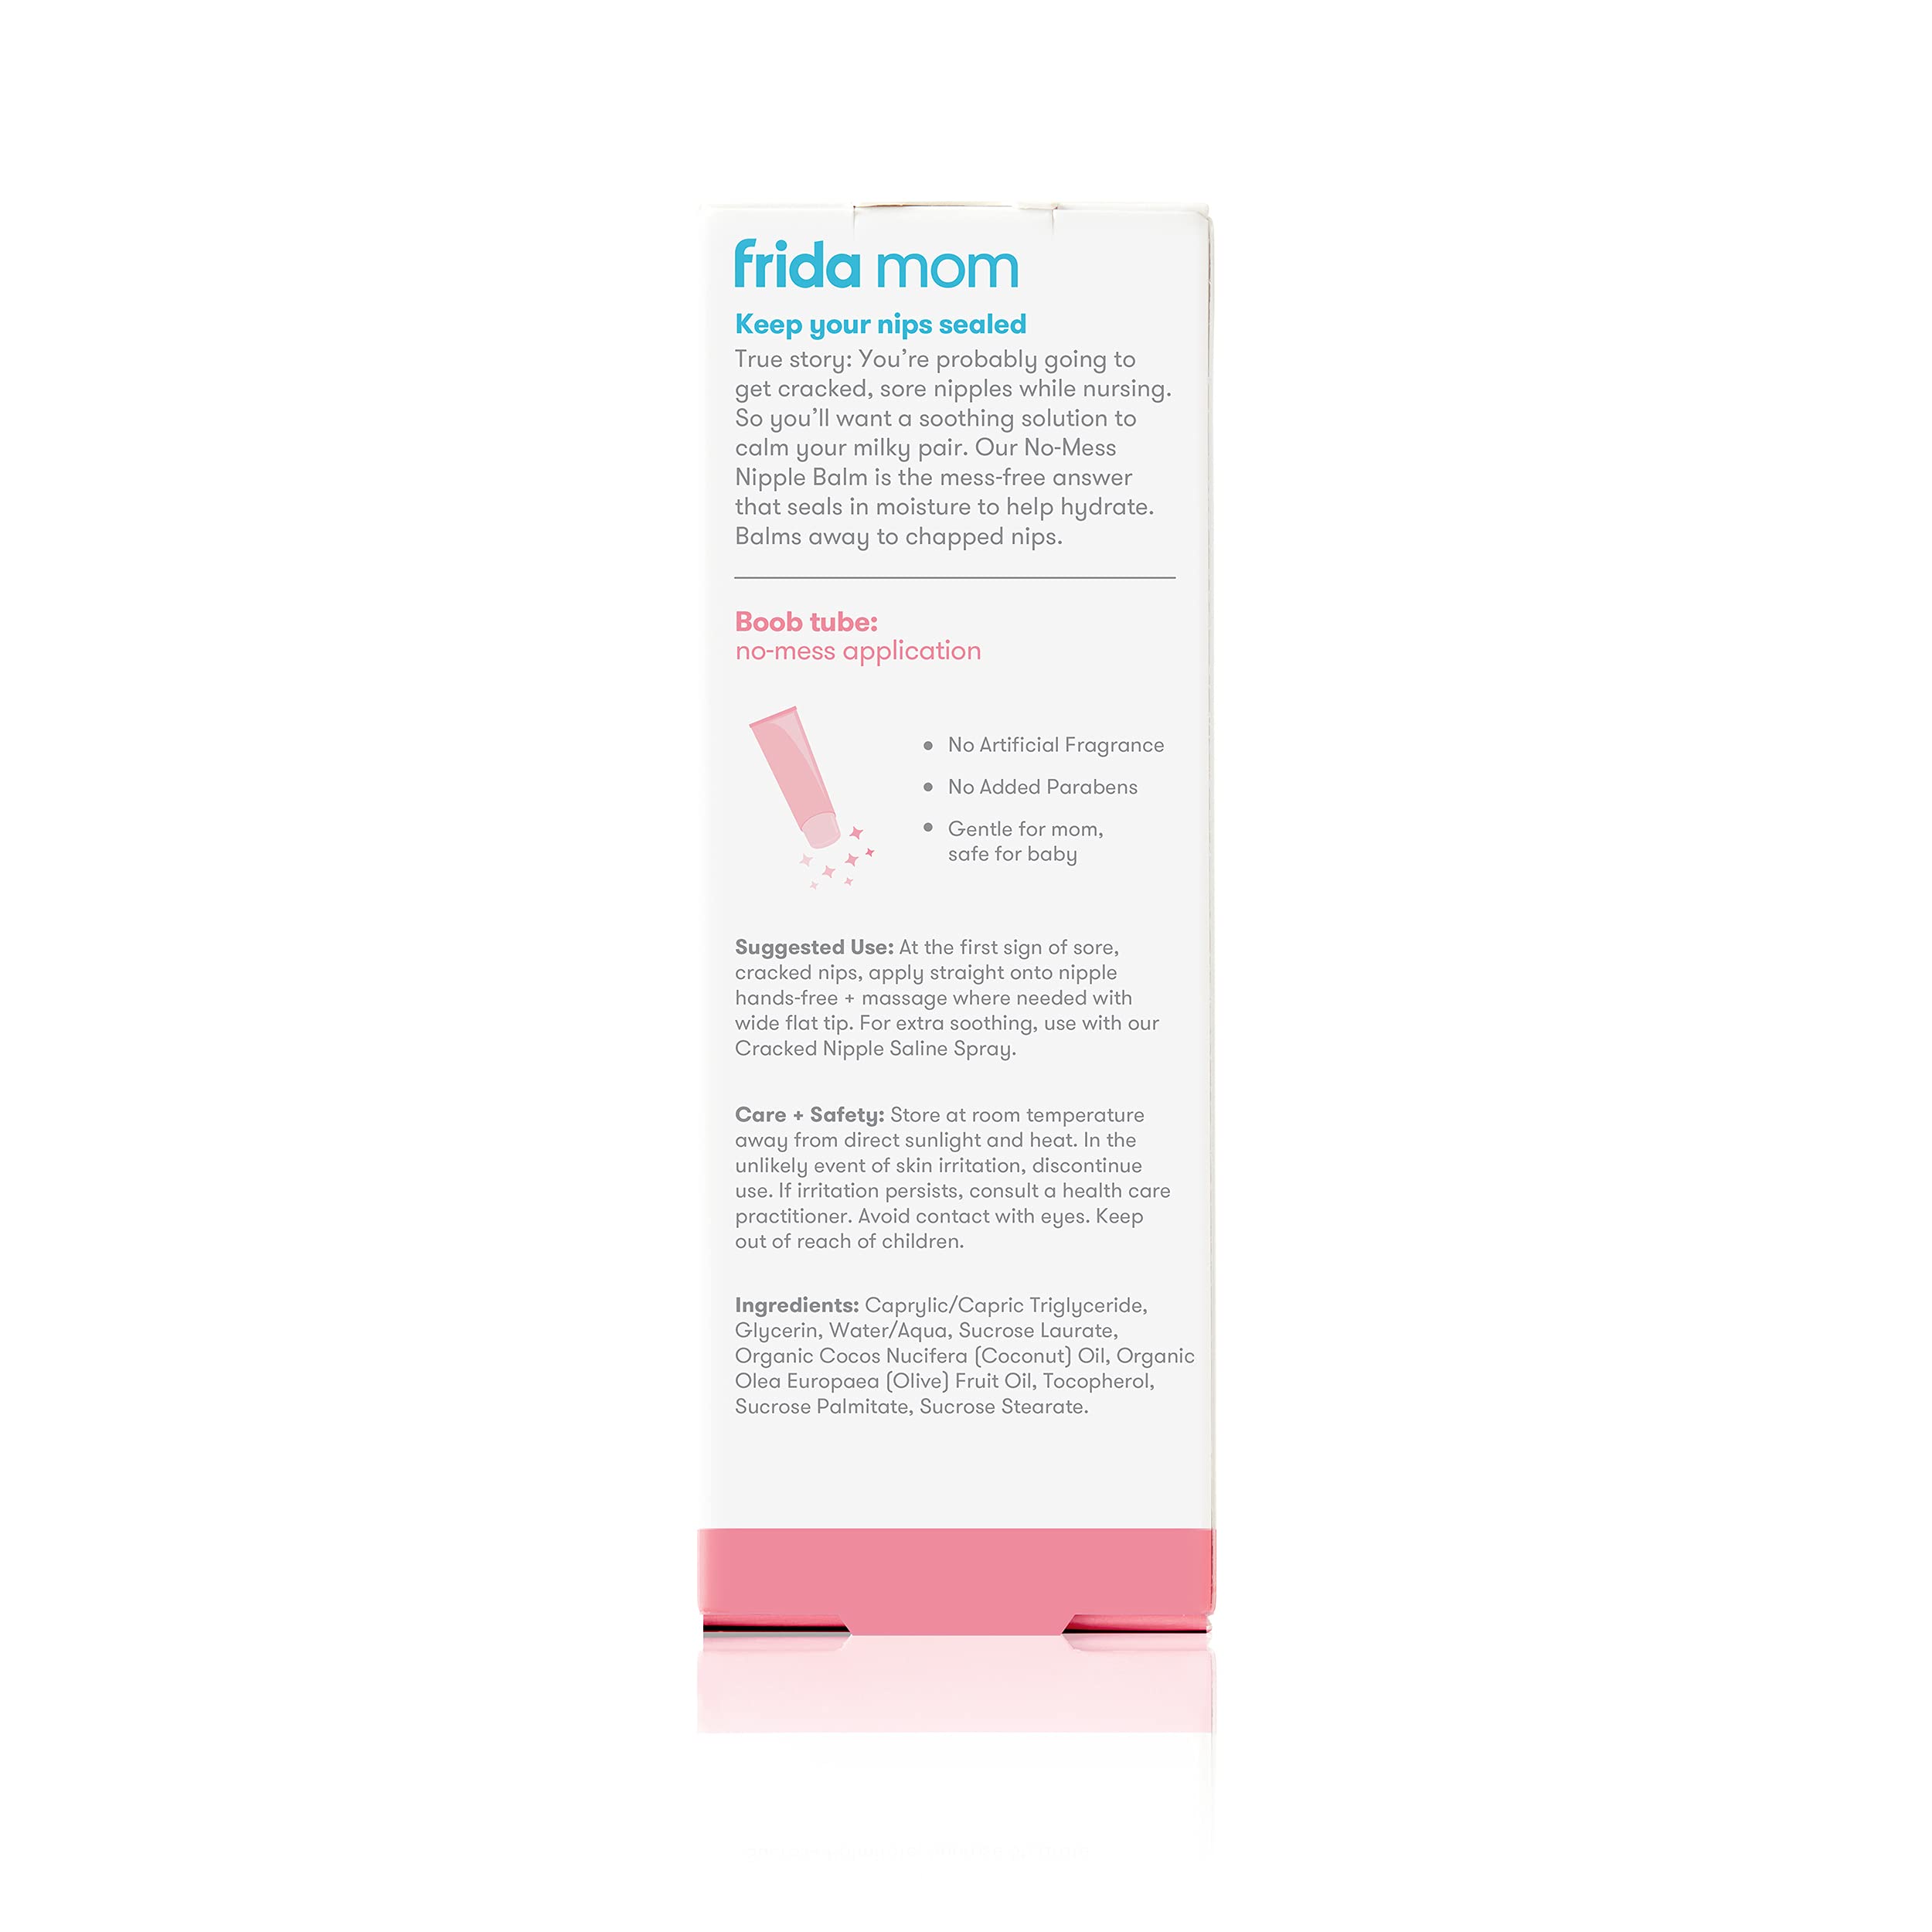 Frida Mom No-Mess Nipple Cream | No-Mess Nipple Balm to Seal in Moisture to Help Hydrate | Gentle for Baby + Mom | 1.5 Fl oz